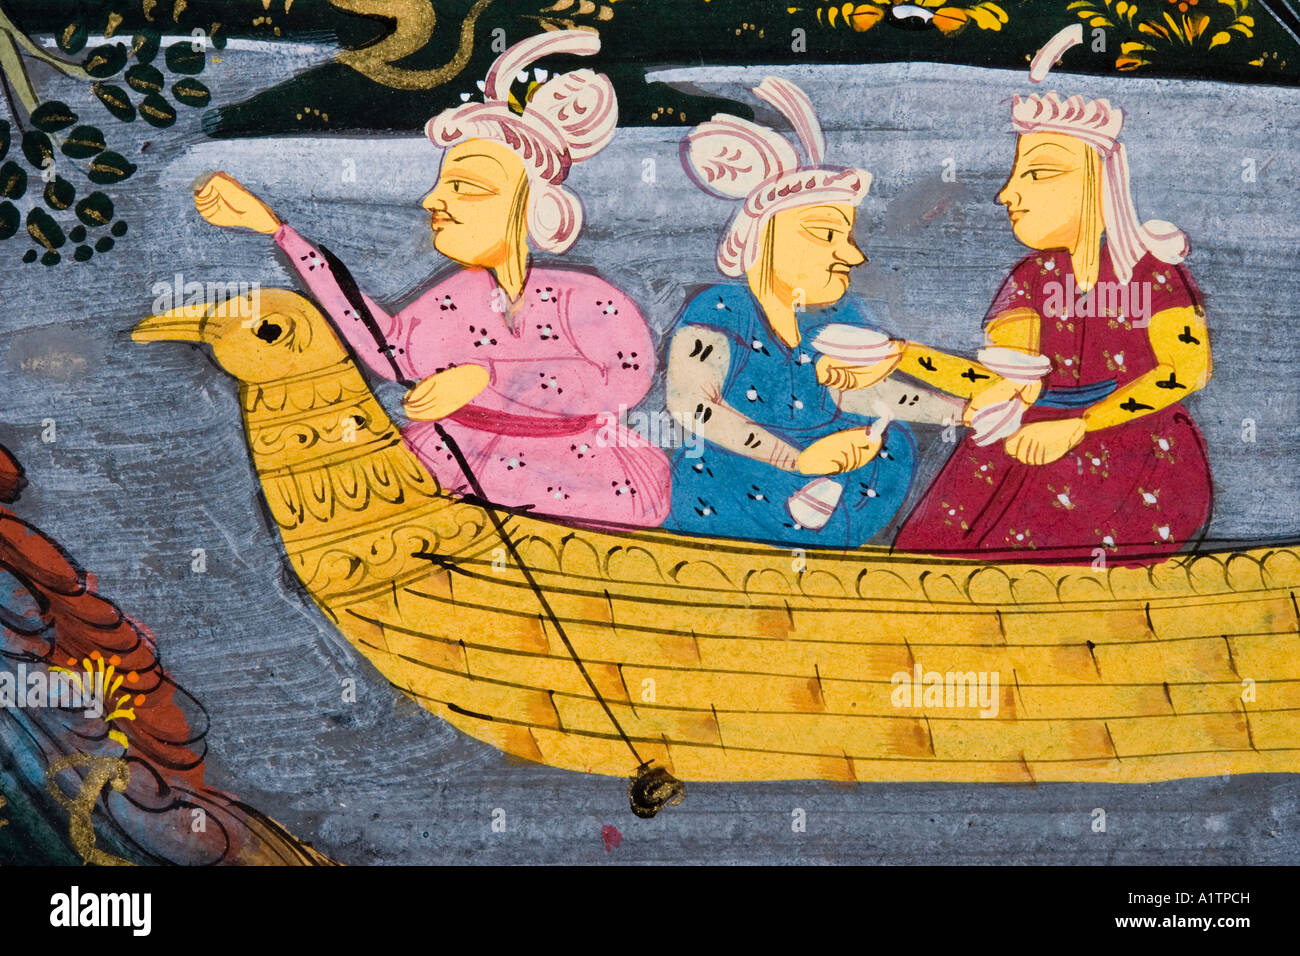 Detail from a painting from the 17th century. Persian manuscript. Men and woman in a boat on a river or lake. Man fishing from the  boat. Stock Photo